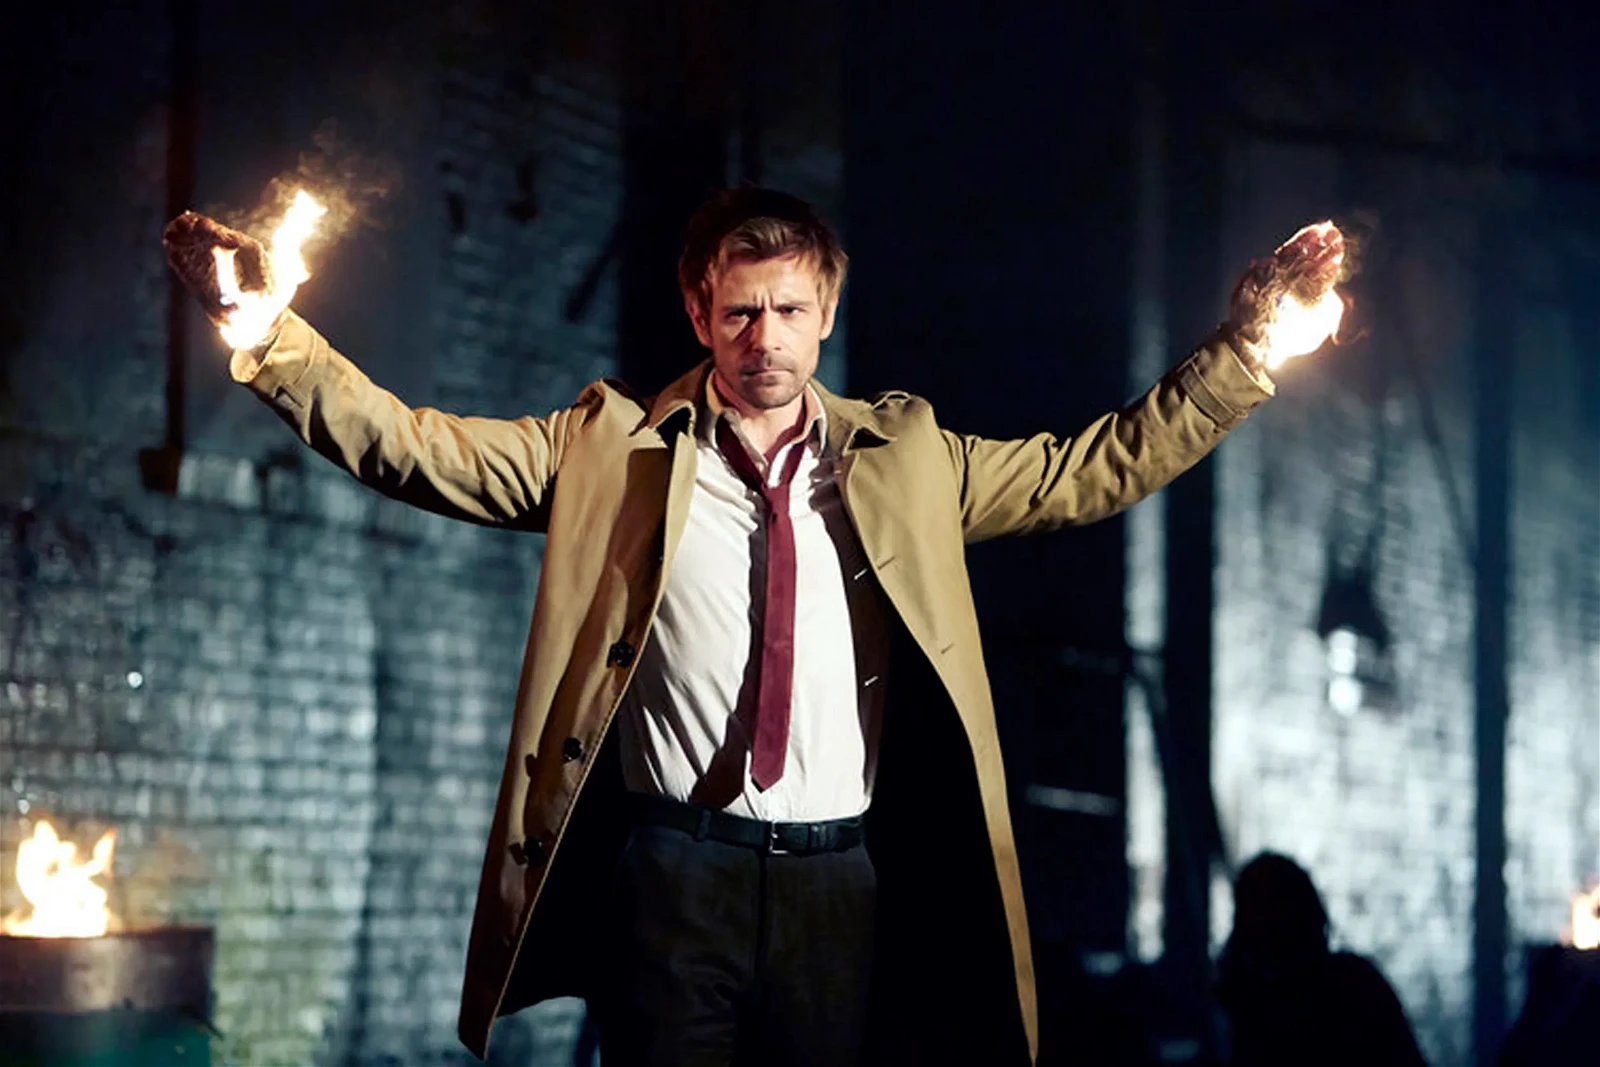 Constantine 2 is said to be an R-rated movie